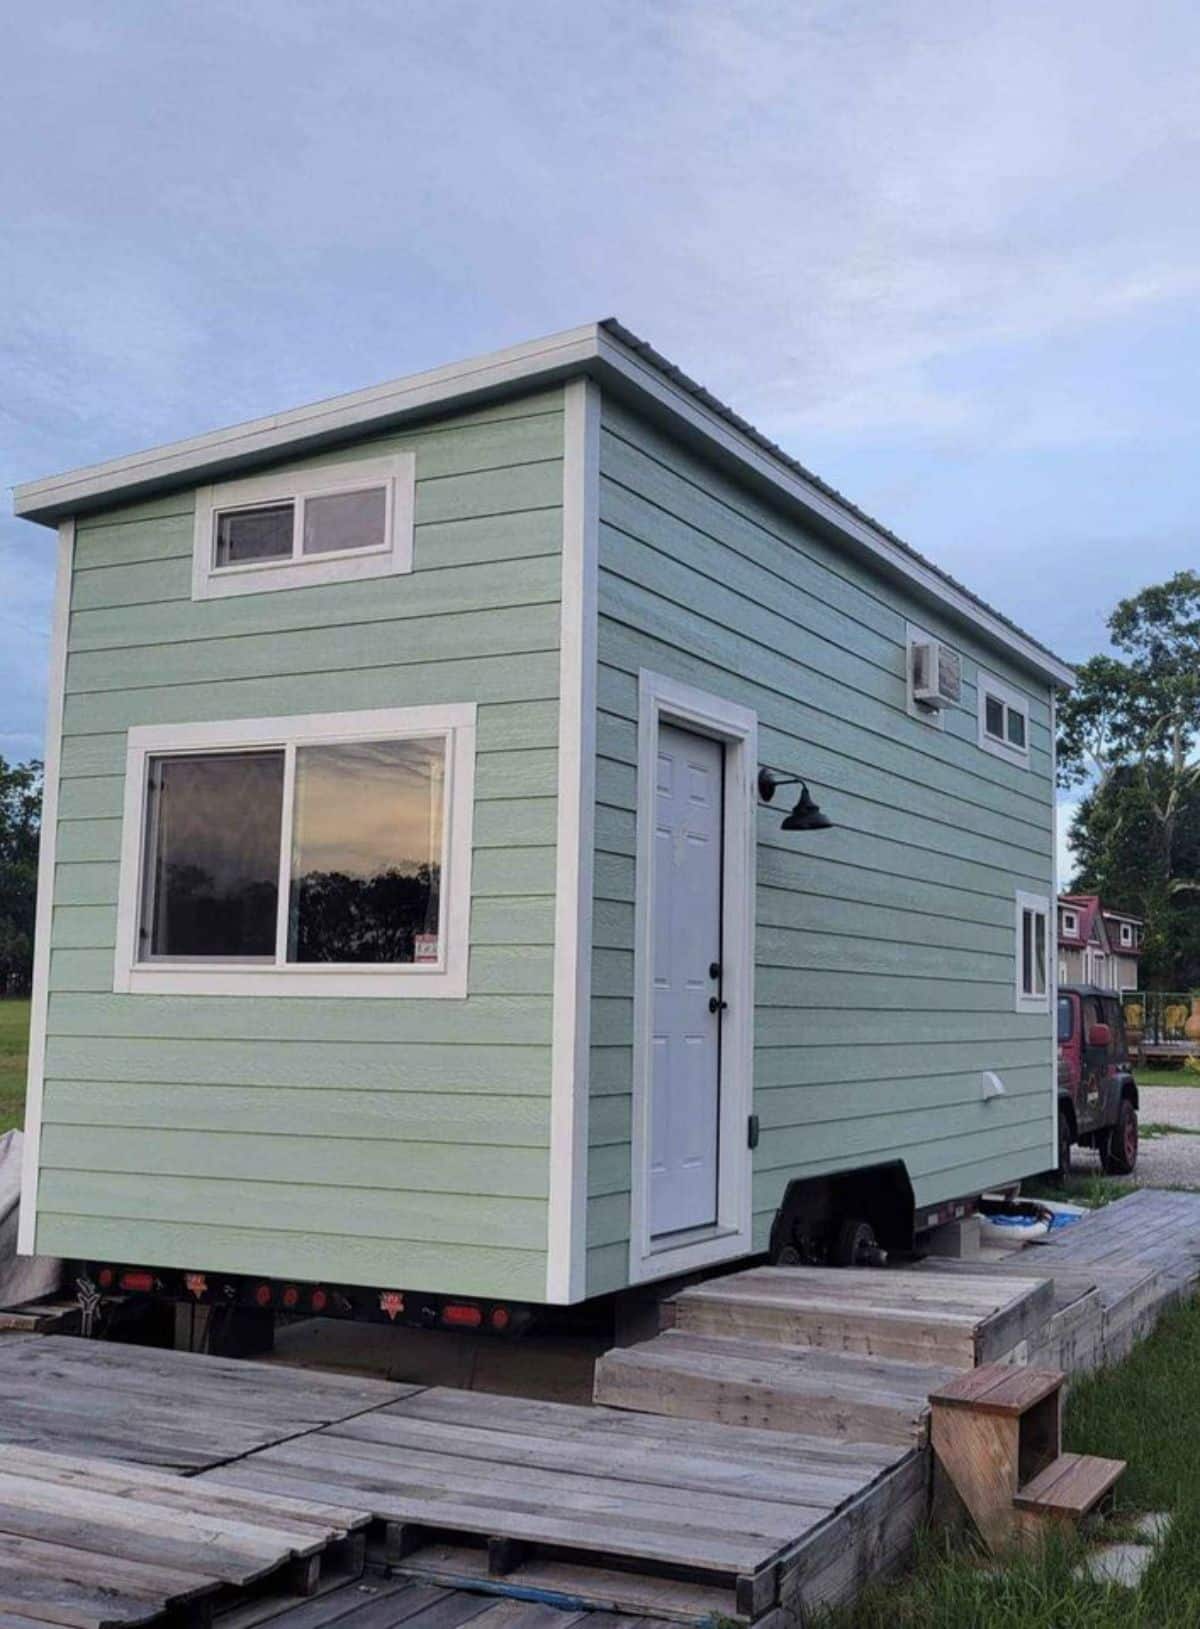 Green colored exterior and main entrance view of 20’ tiny house with two lofts